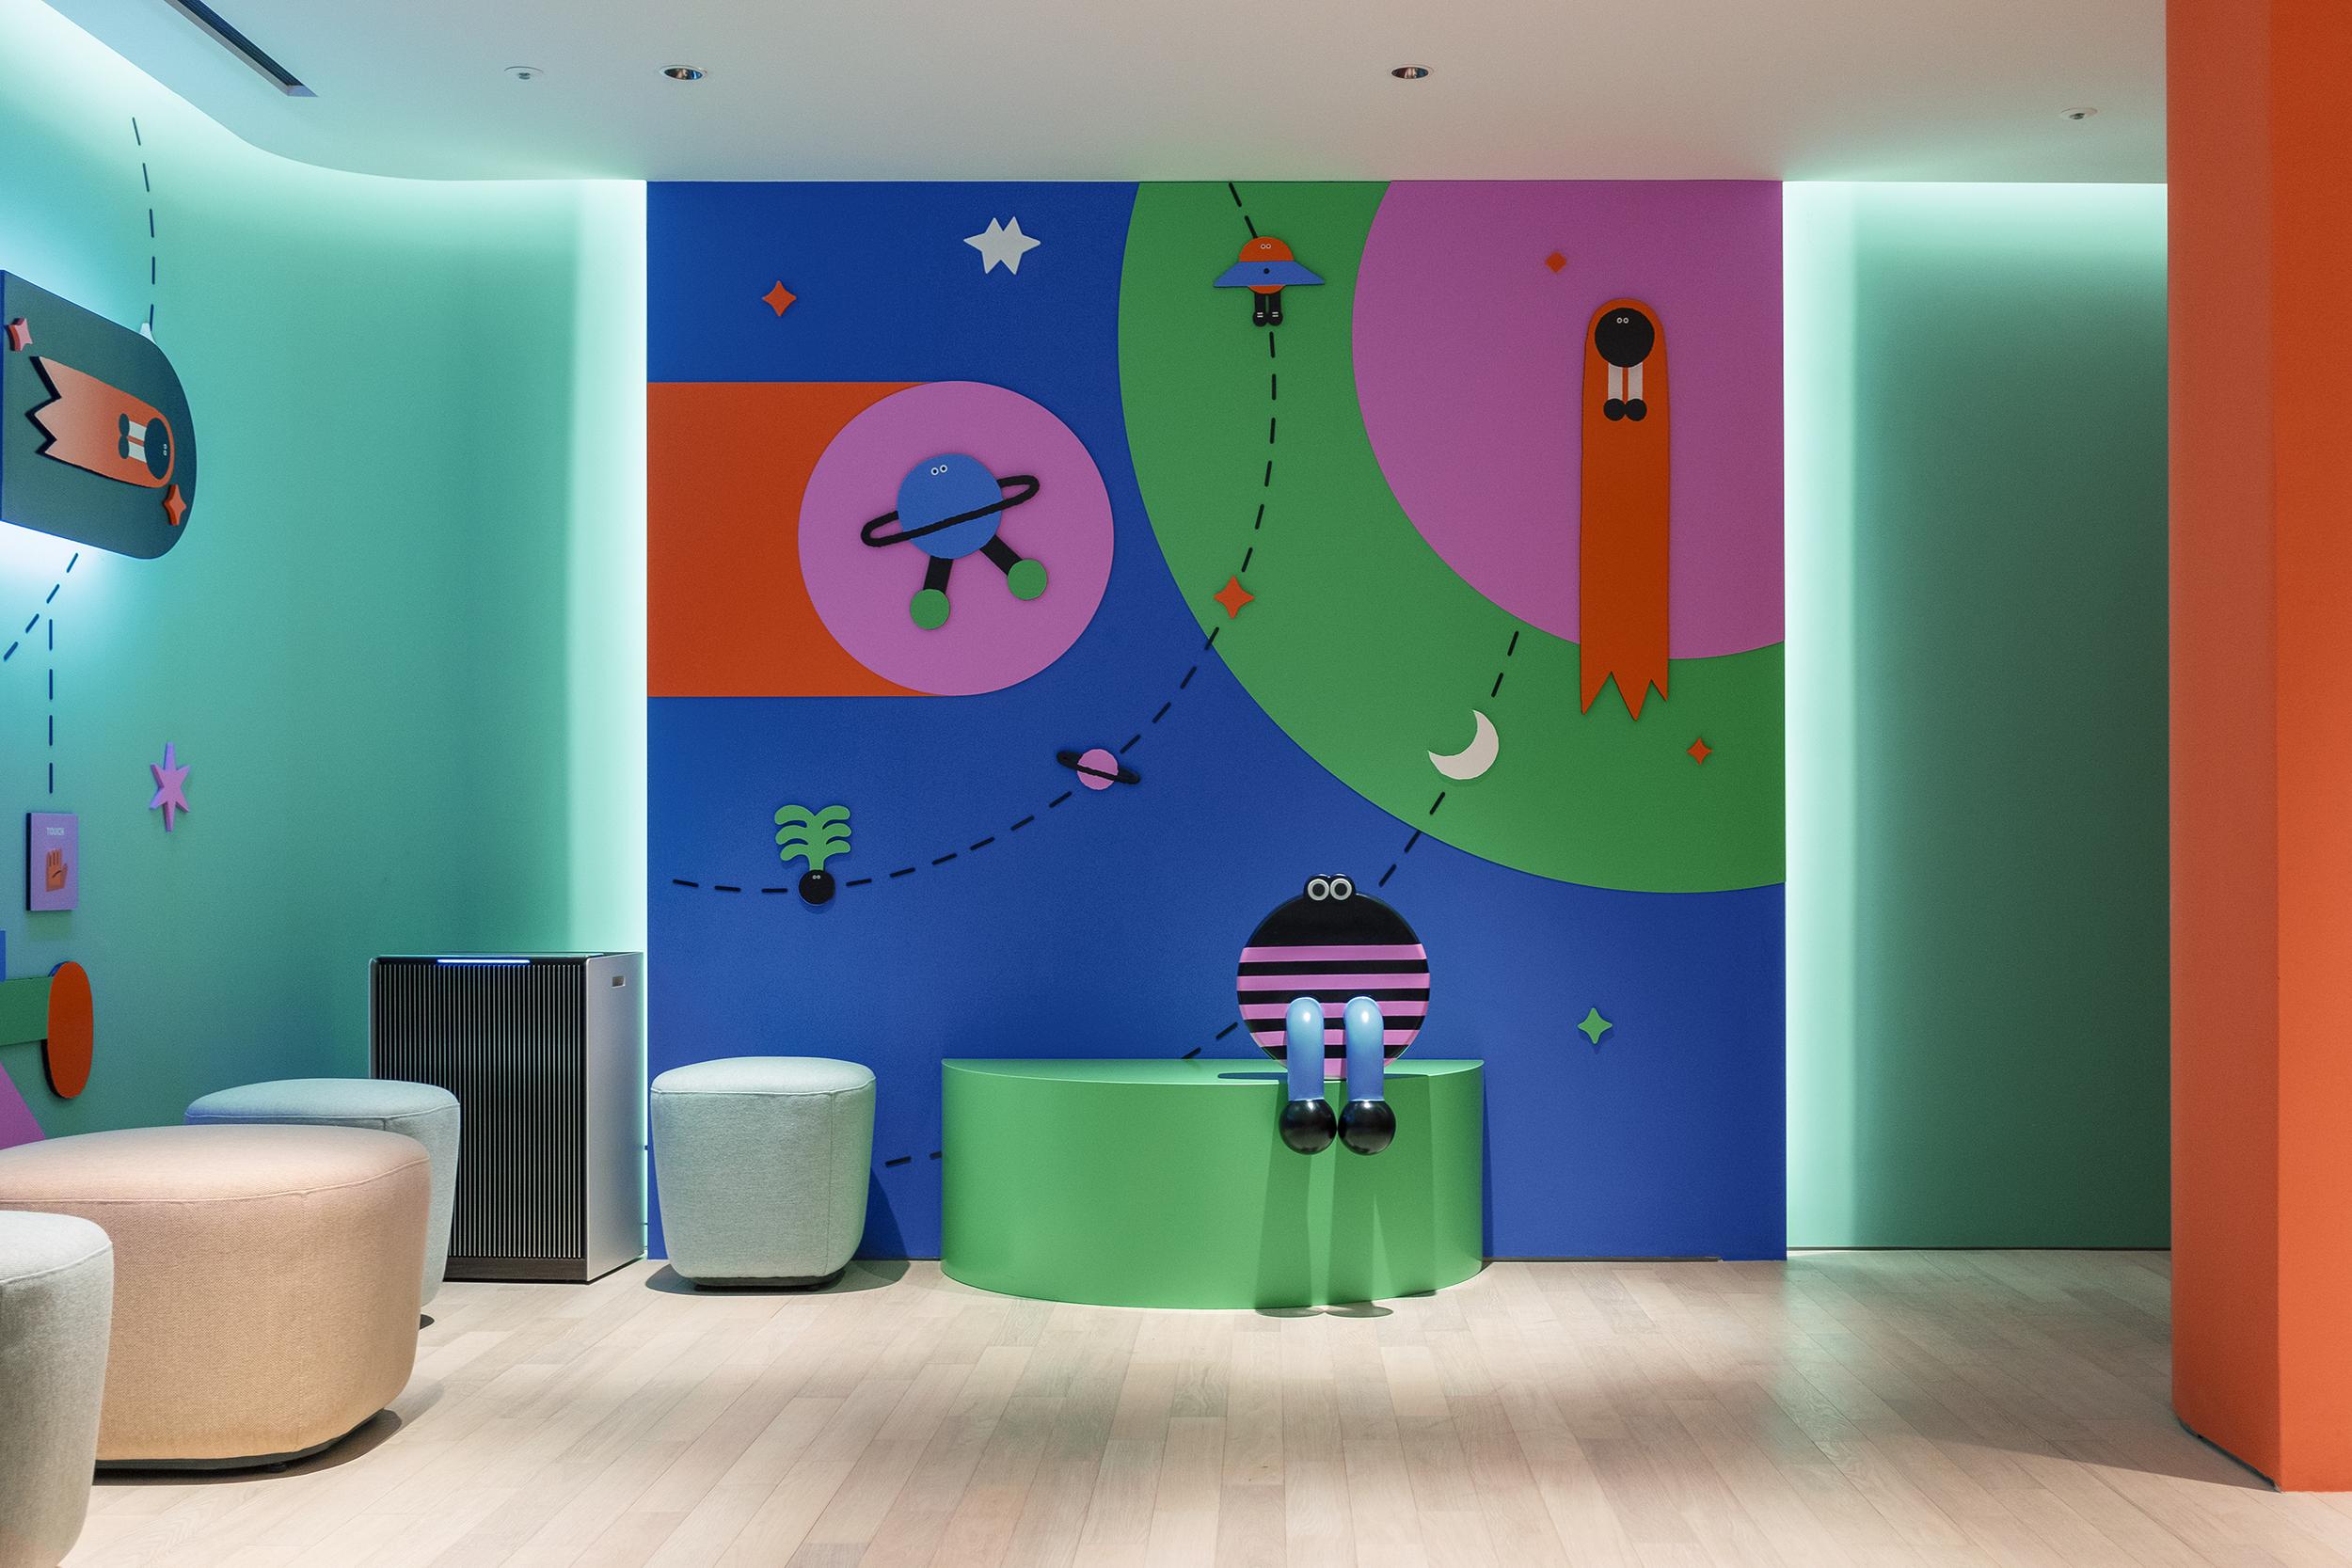 Brand identity and interior design designed by Studio fnt for toy department Petit Planet at South Korean department store Hyundai